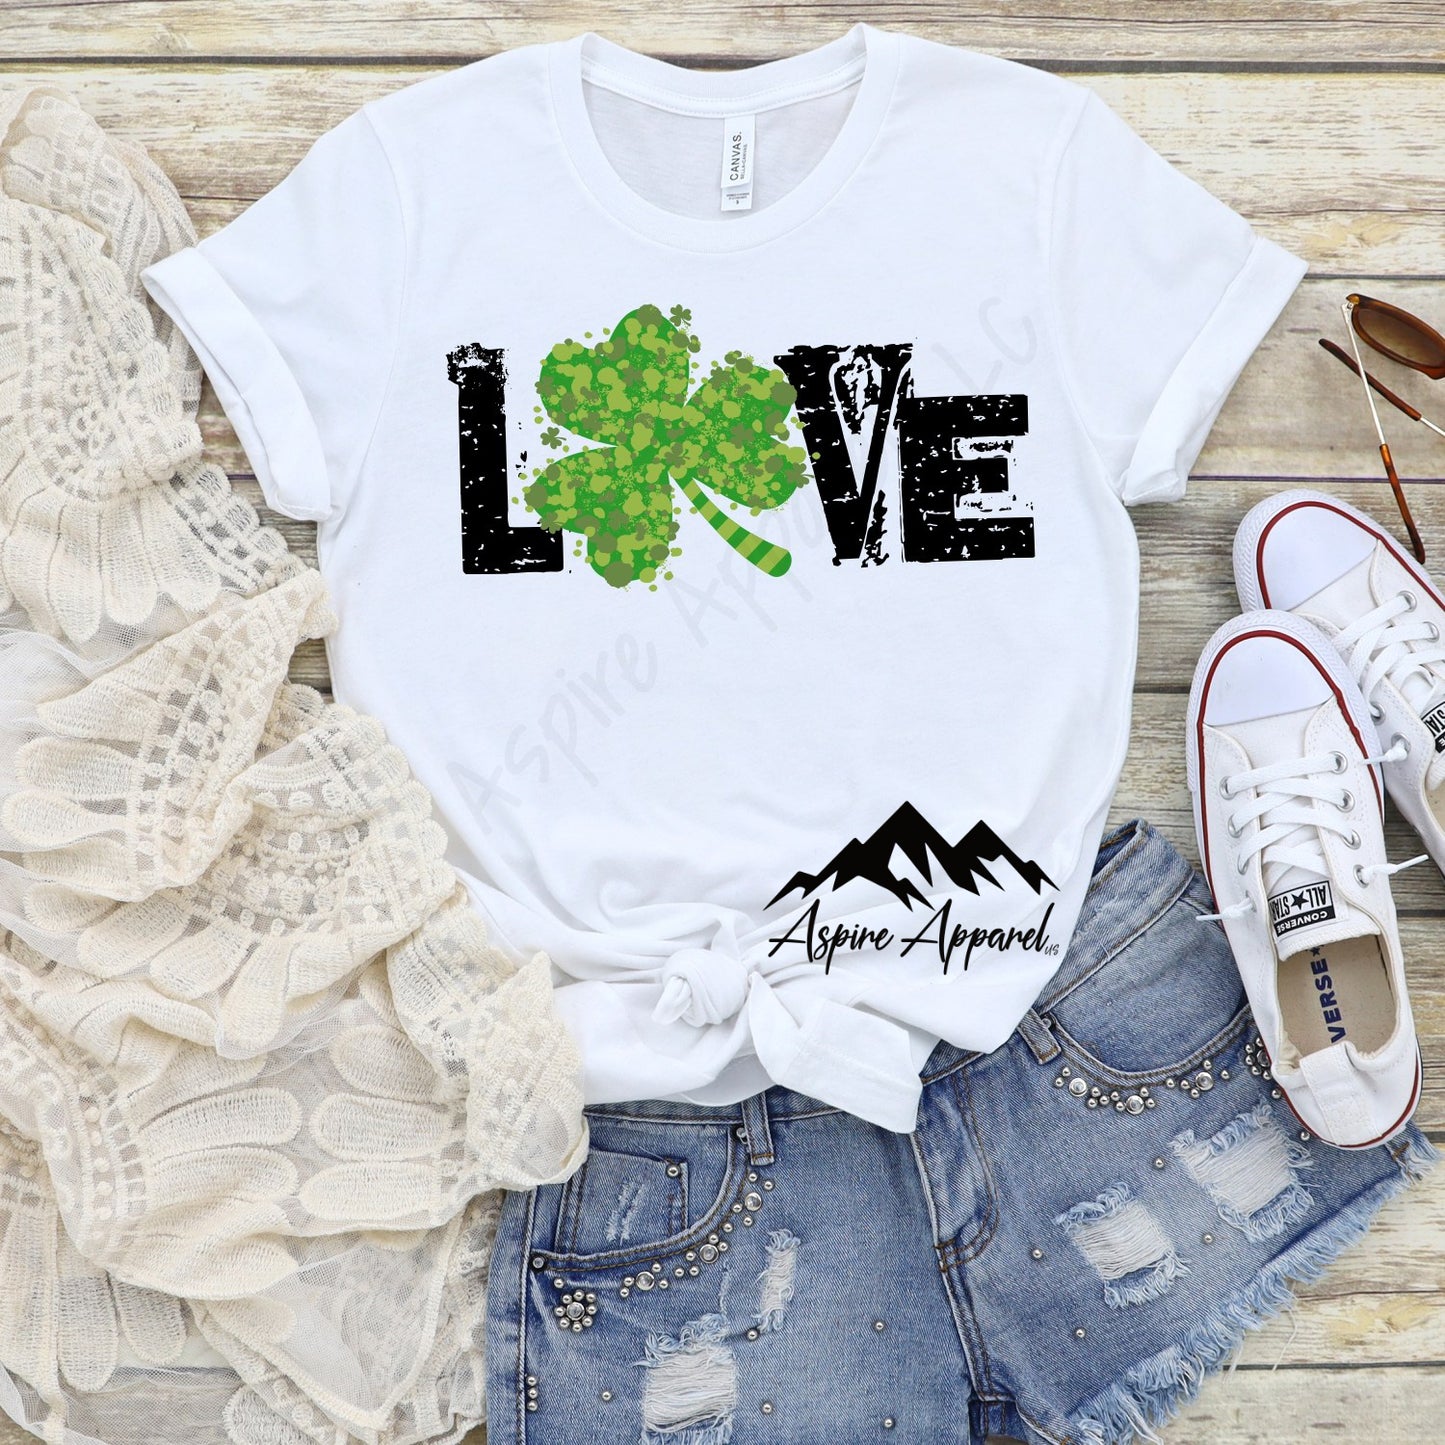 LOVE with Shamrock - Build Your Own Shirt